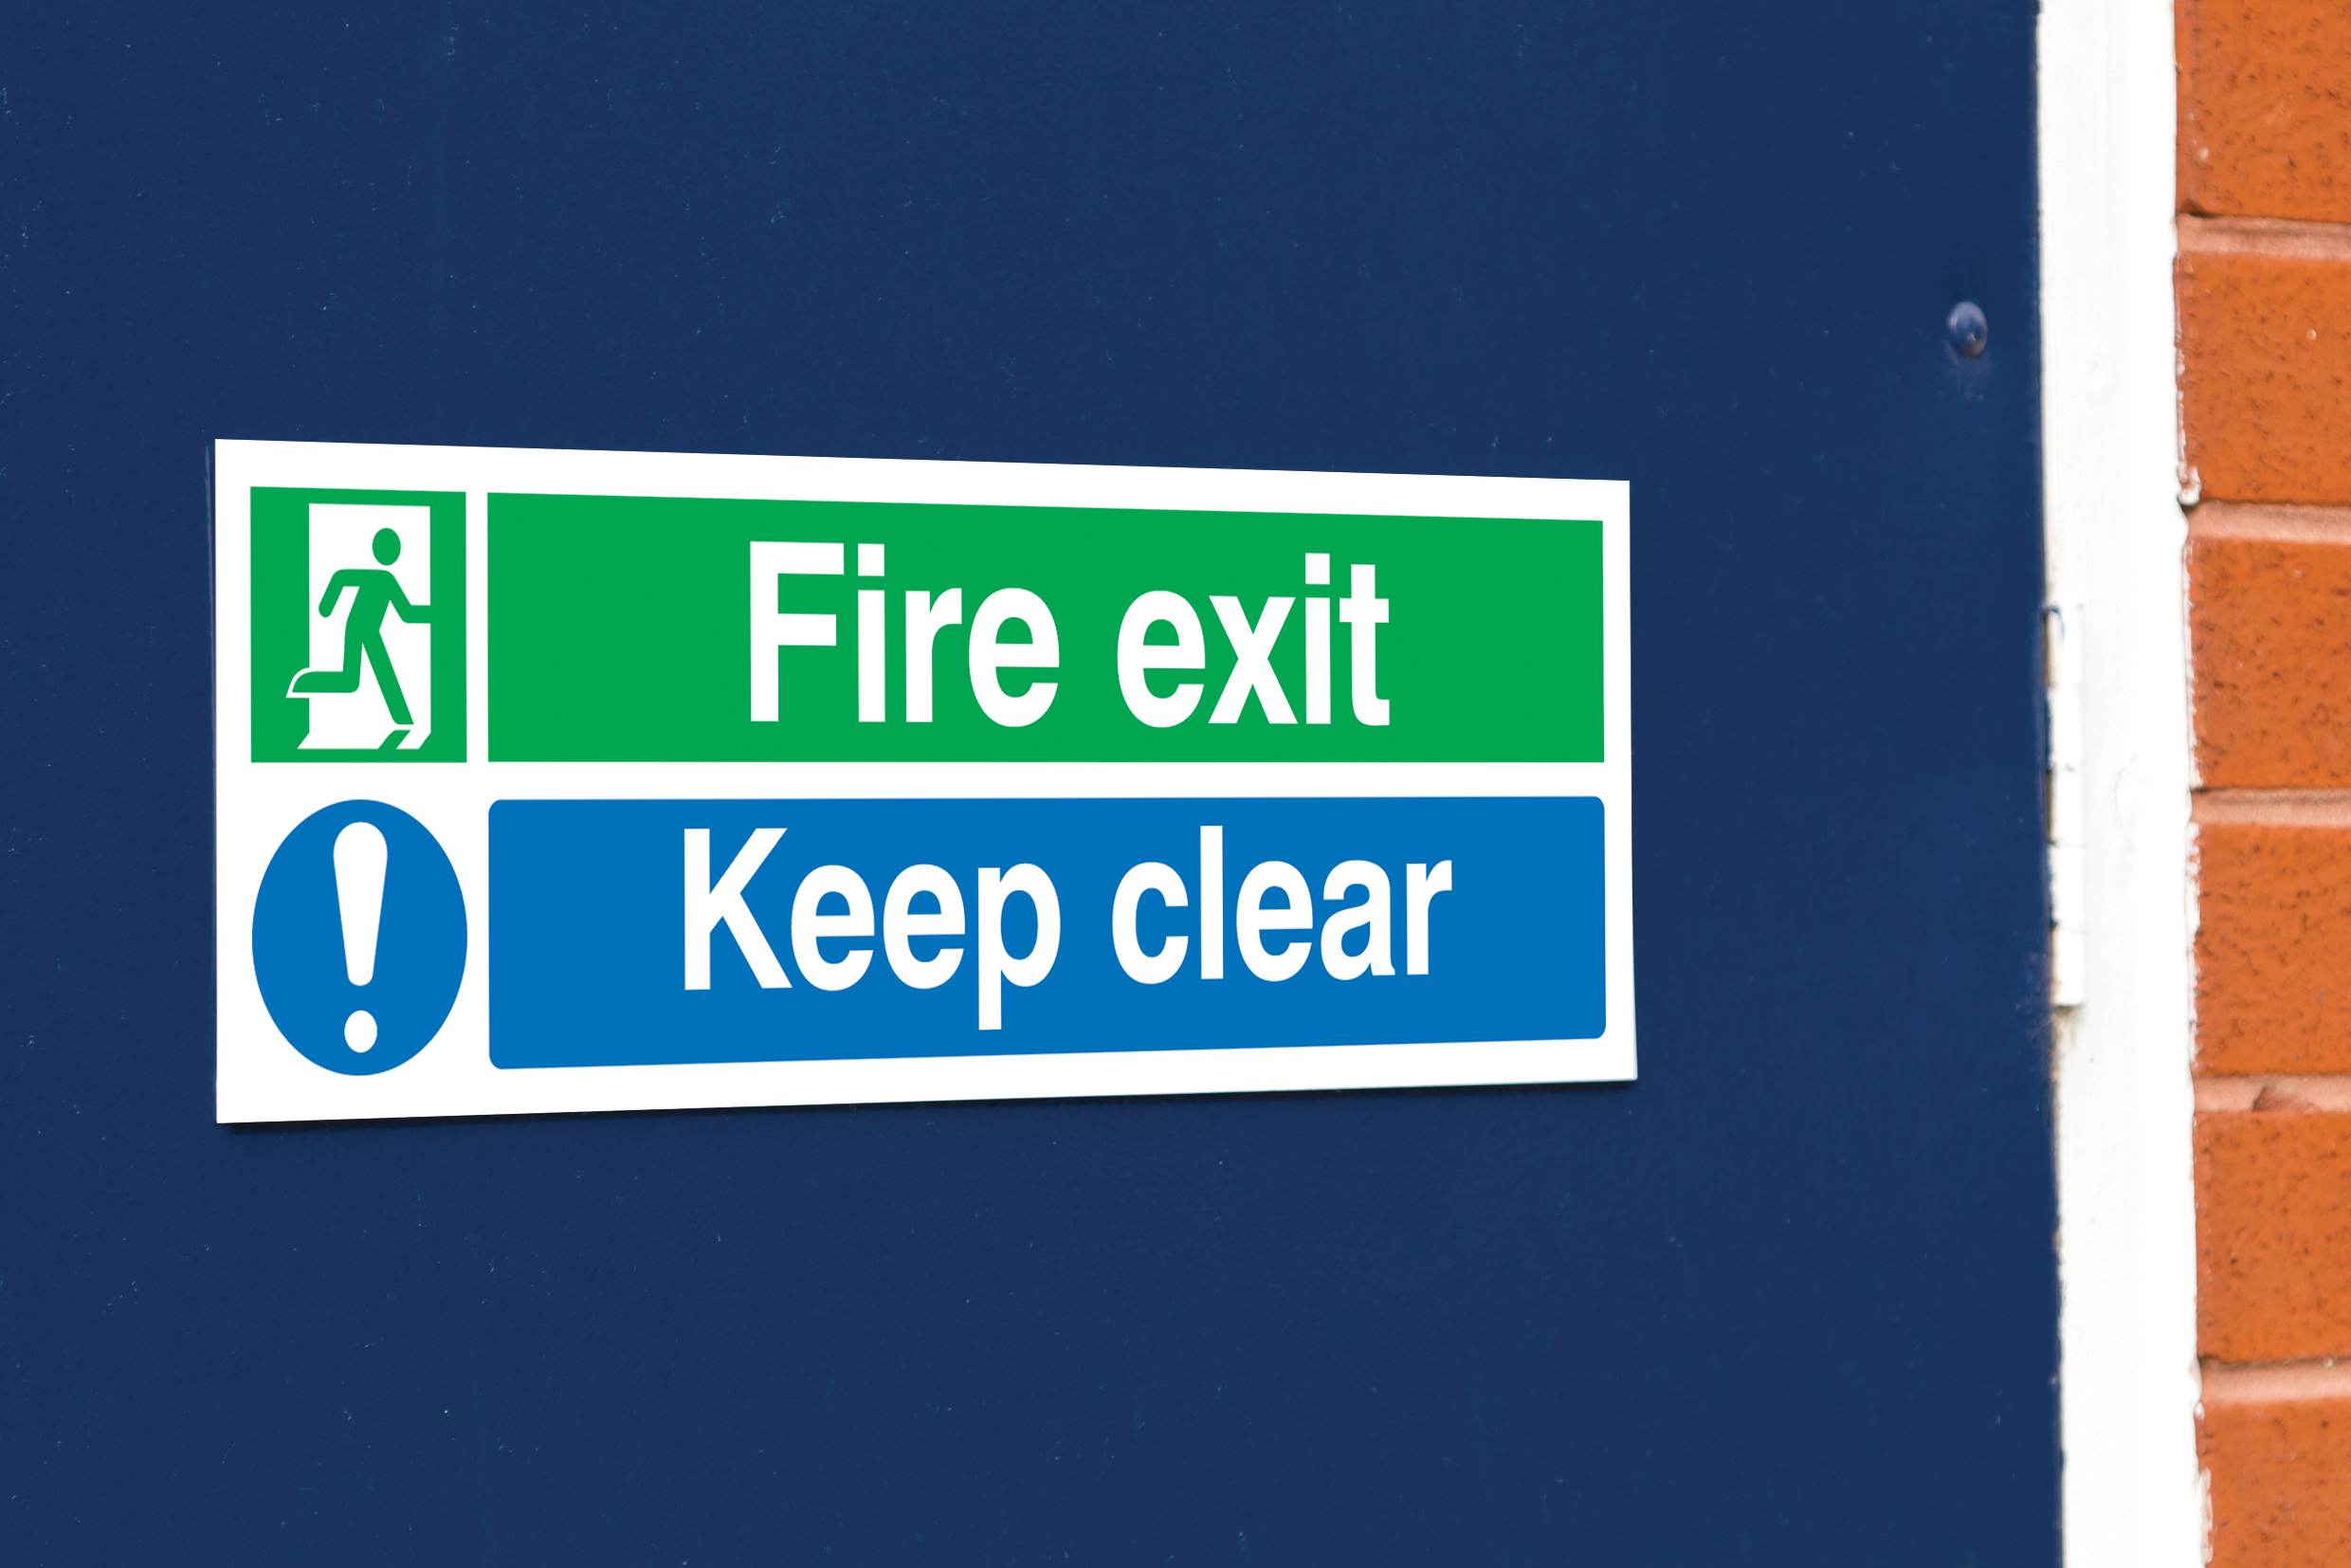 Fire safety warning signs, fire exit signs and fire-fighting equipment